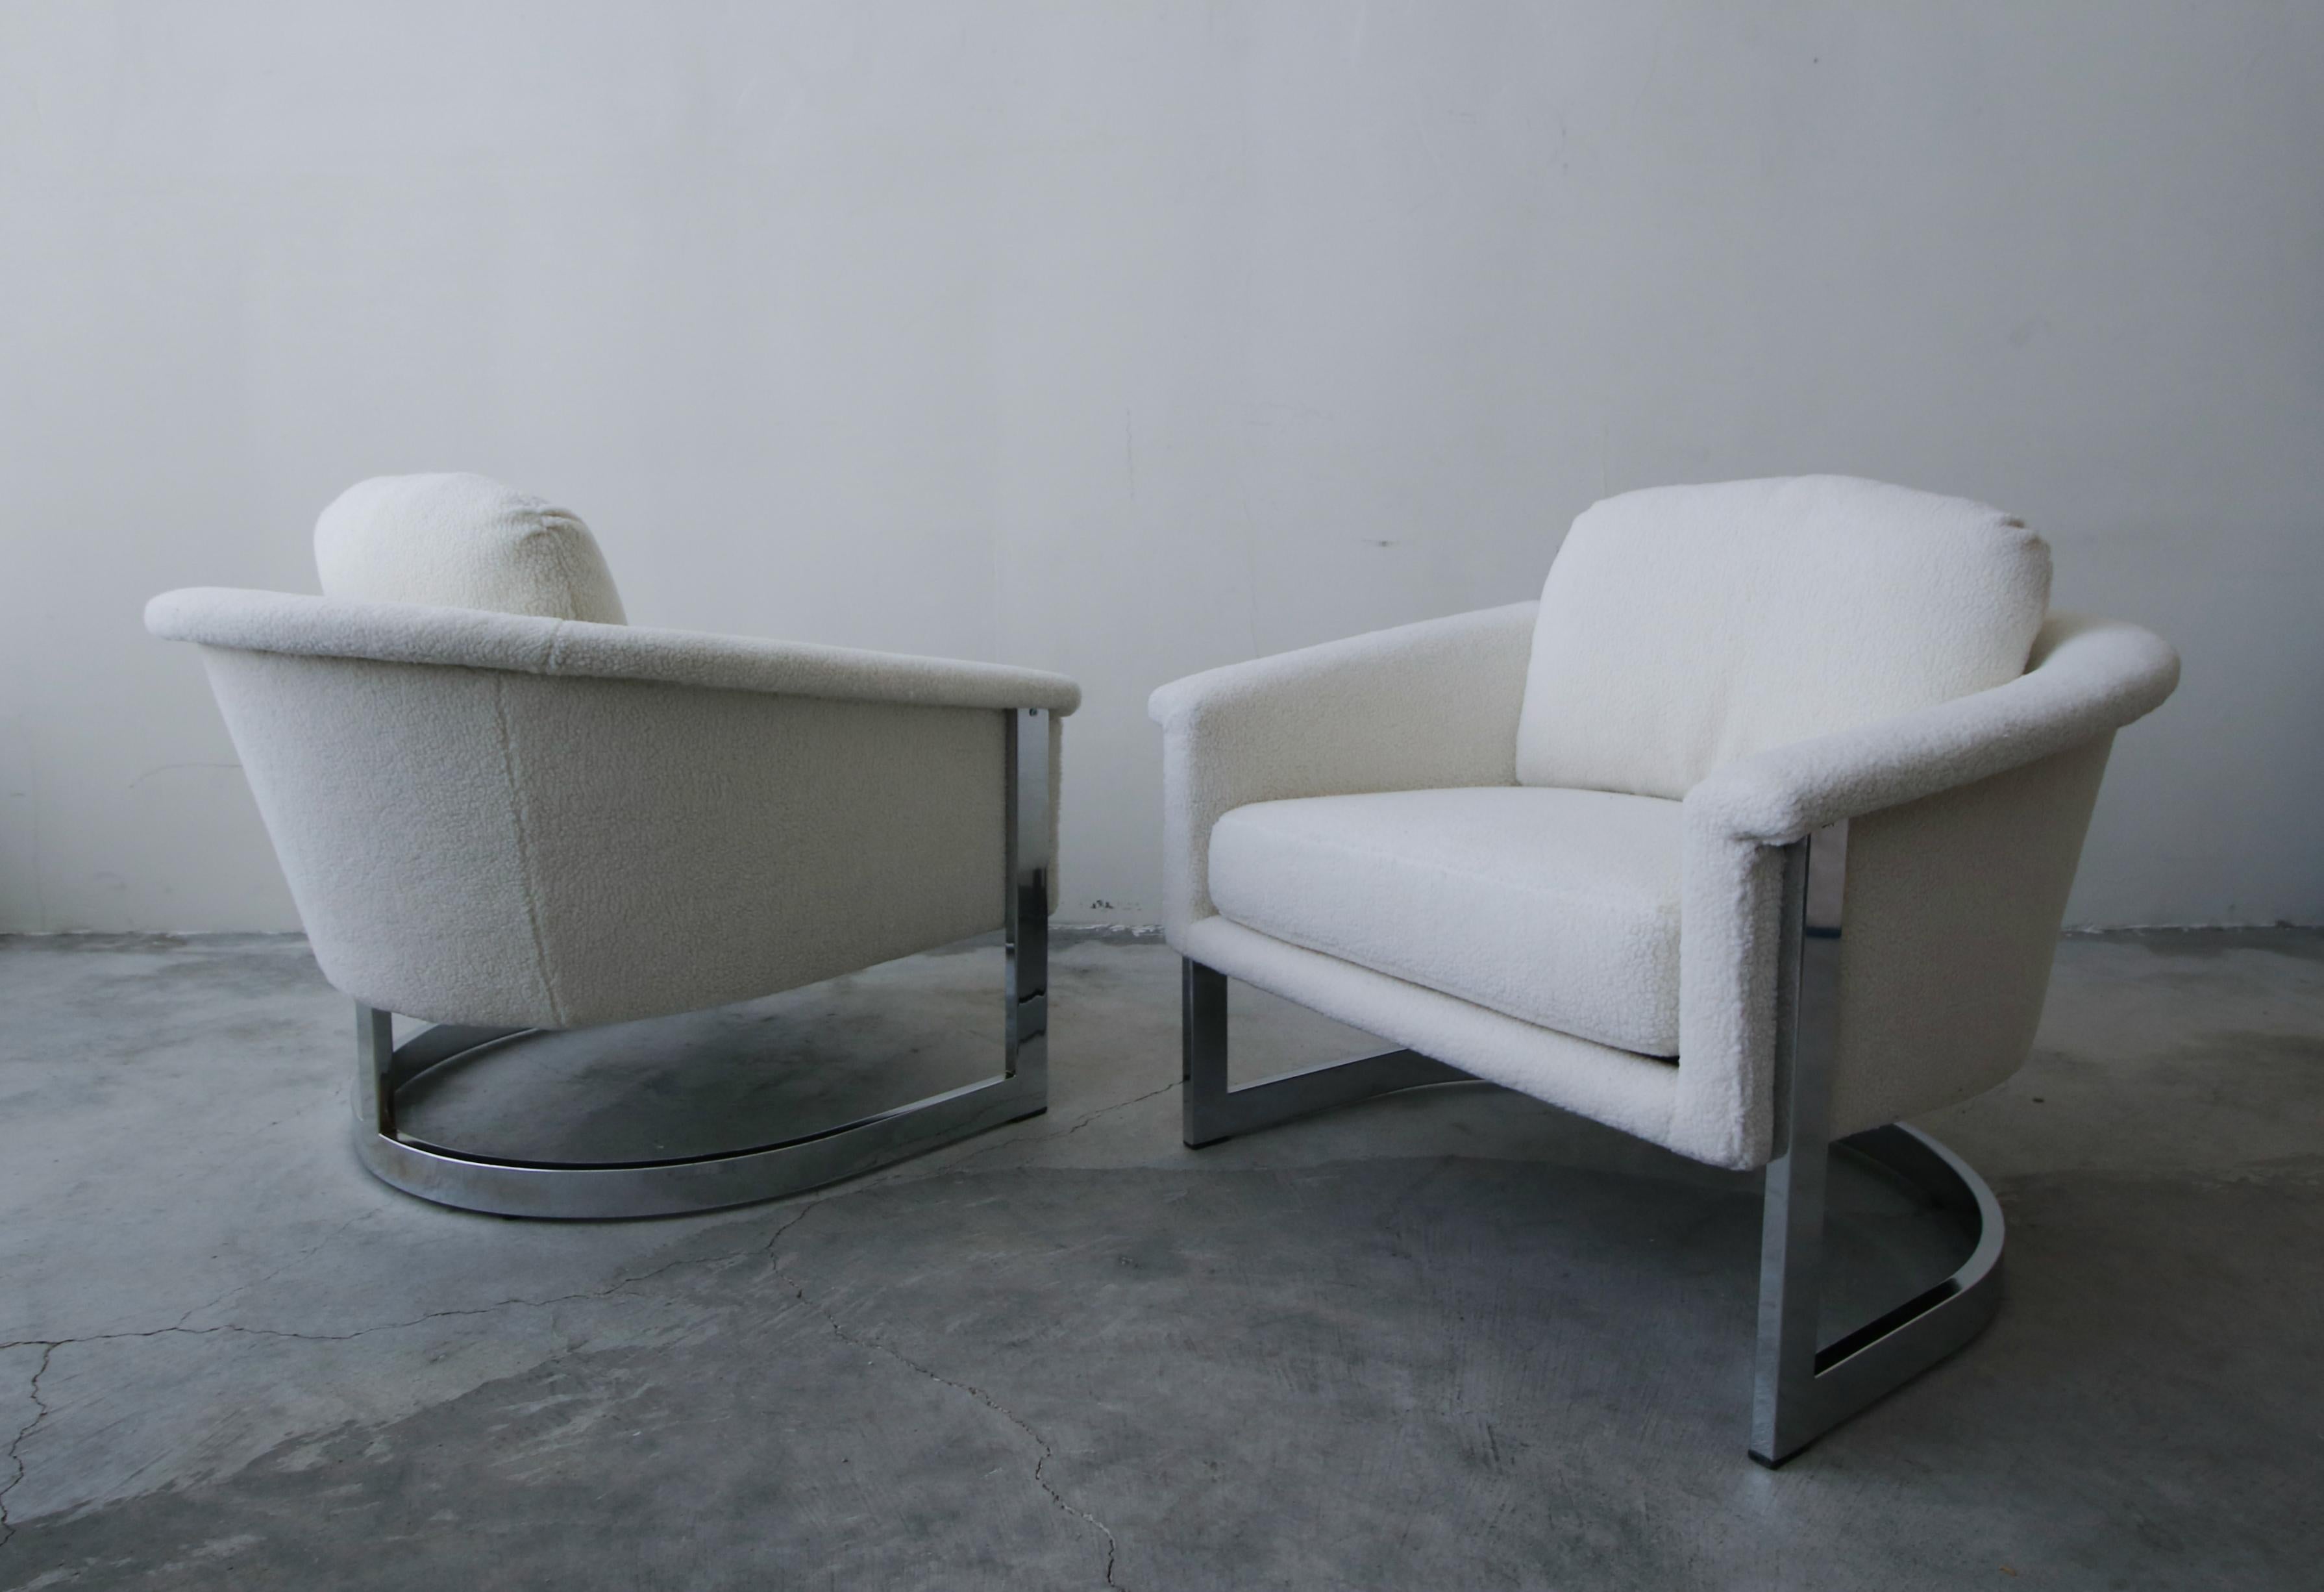 Exquisite pair of midcentury chromed steel, cantilever lounge chairs by Selig. They have a beautiful profile. The beautiful chrome frames cradle the chairs. 

Chairs have been professionally restored with all new foam and faux Sherpa fabric. The